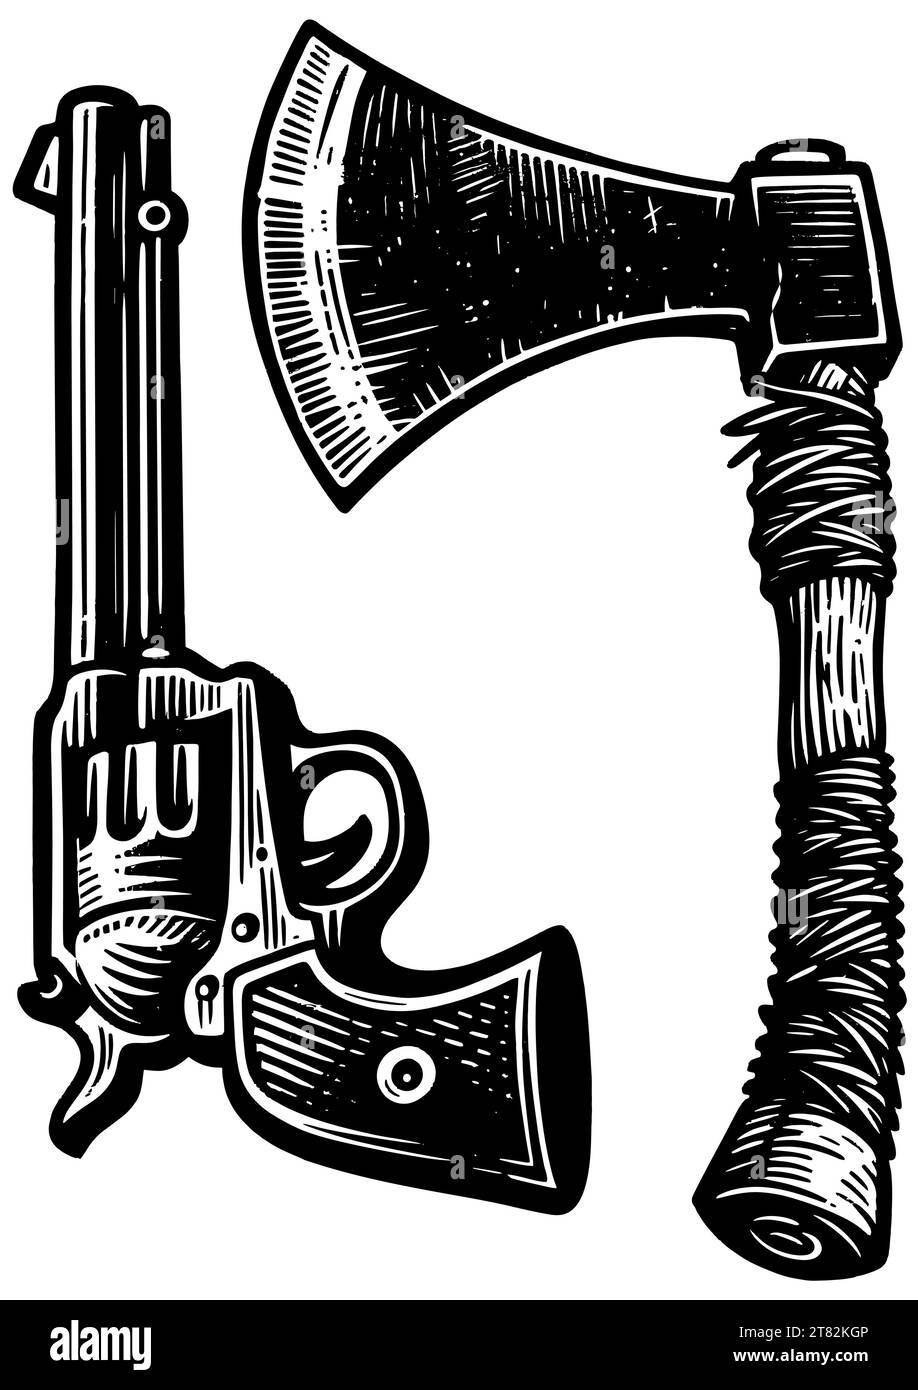 Linocut style illustration of revolver and tomahawk, symbolizing old Western weaponry. Stock Vector